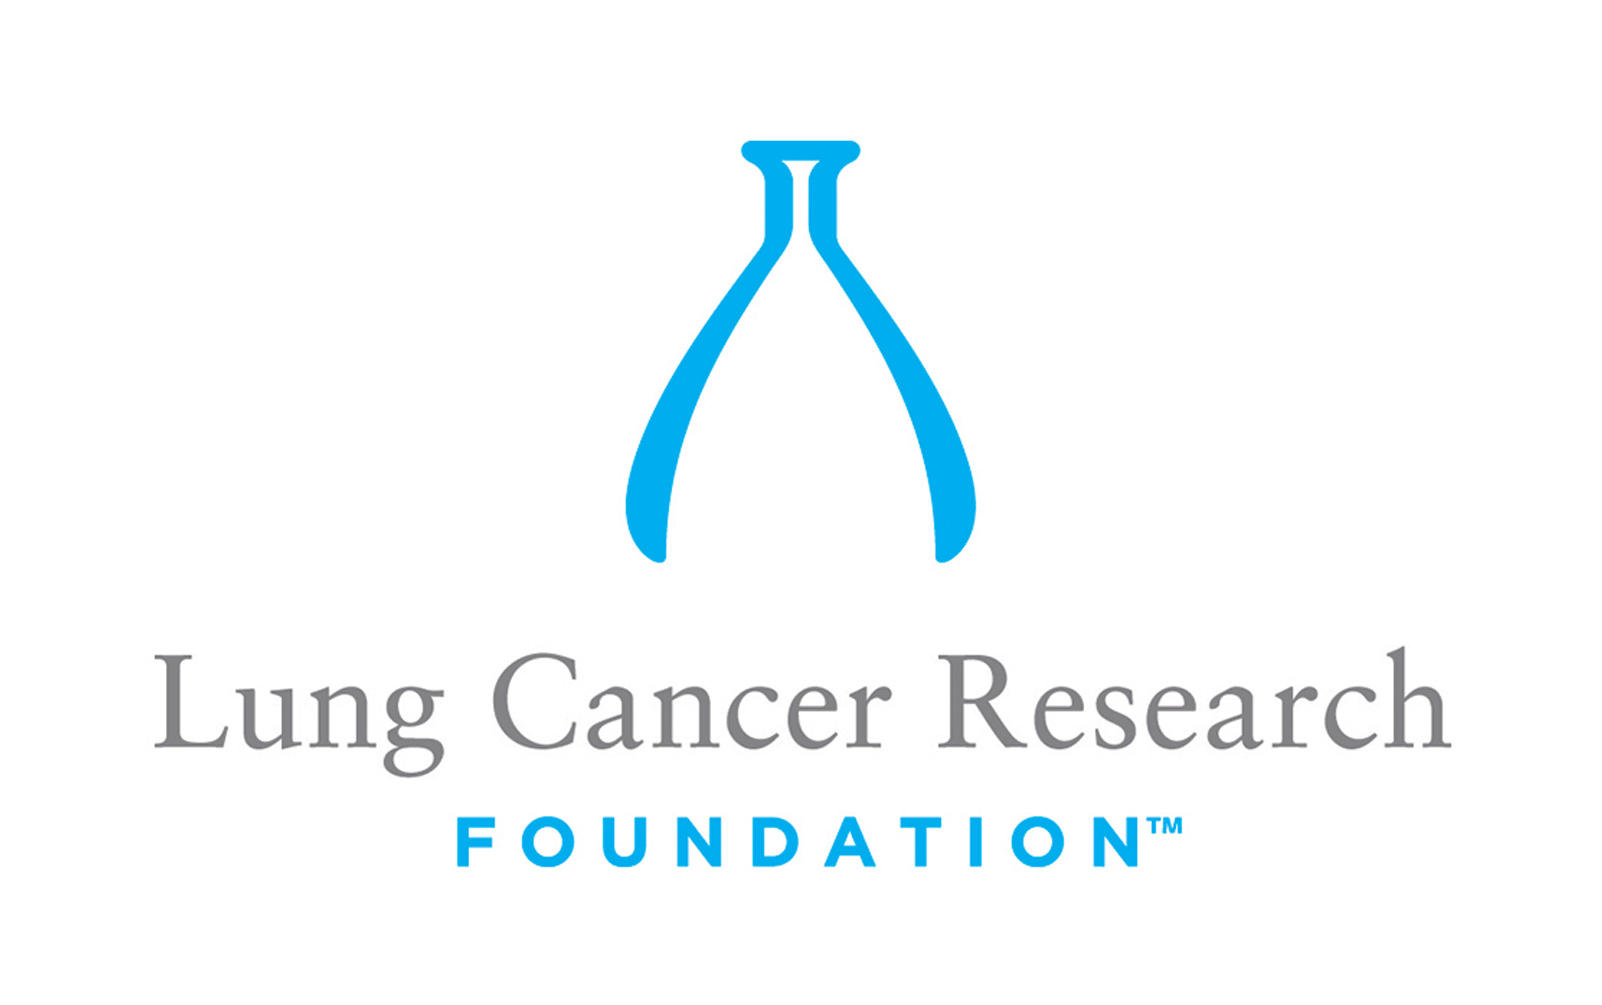 The Lung Cancer Research Foundation and Free to Breathe Merge to Fight Lung Cancer